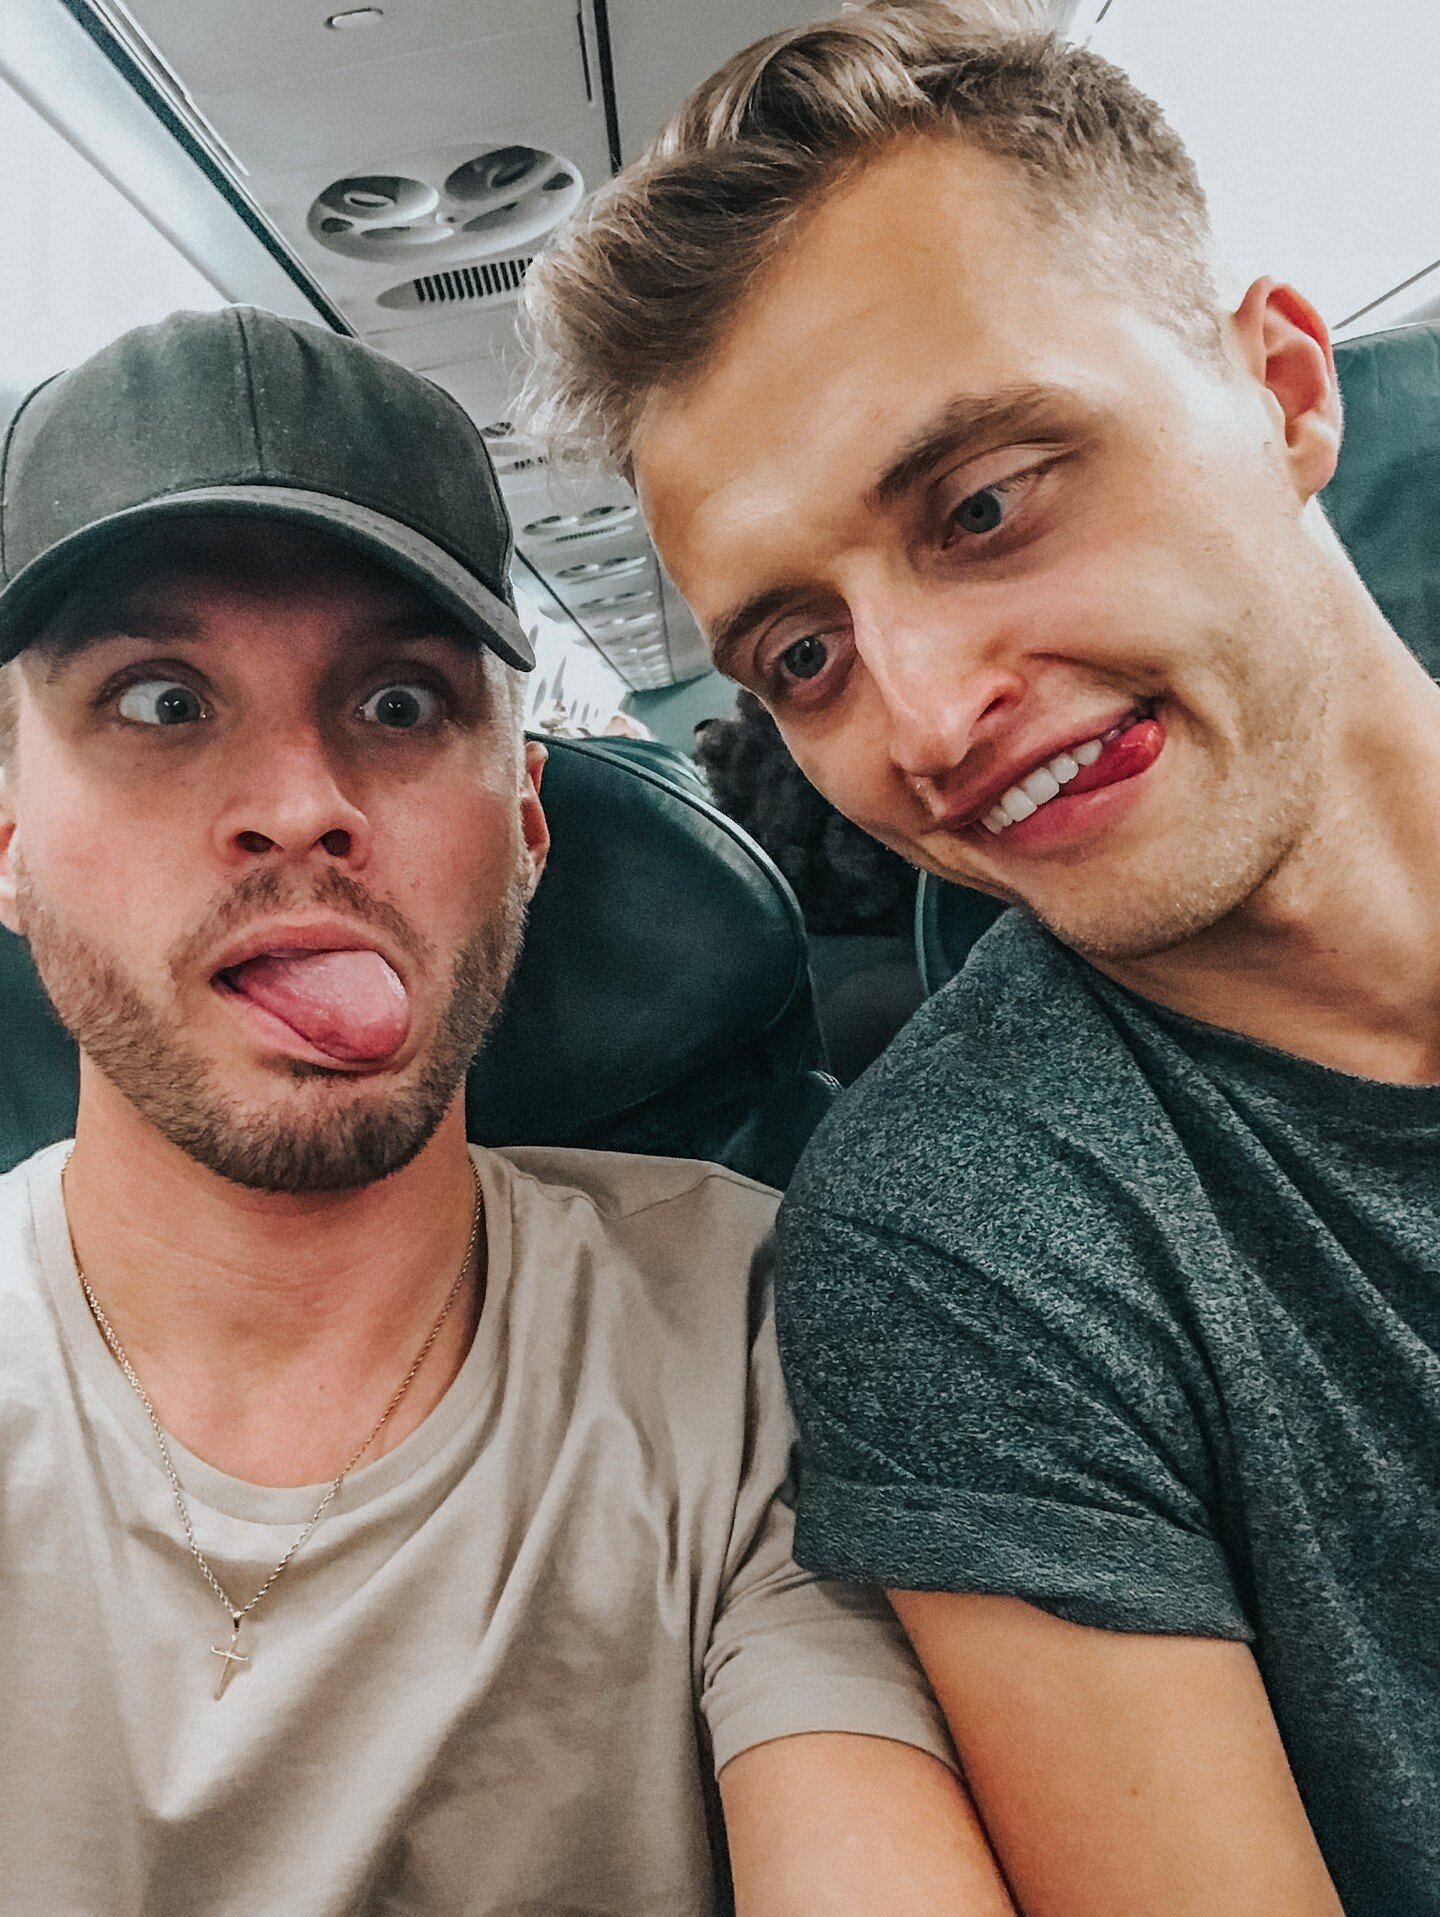 Feelin' wacky this Monday! 🤪 We're ready for another week of warmer weather and some much deserved Brad and Sam time to be a little goofy!
.
Sometimes Brad and I get so busy that we have to schedule time for us to disconnect from everything and just